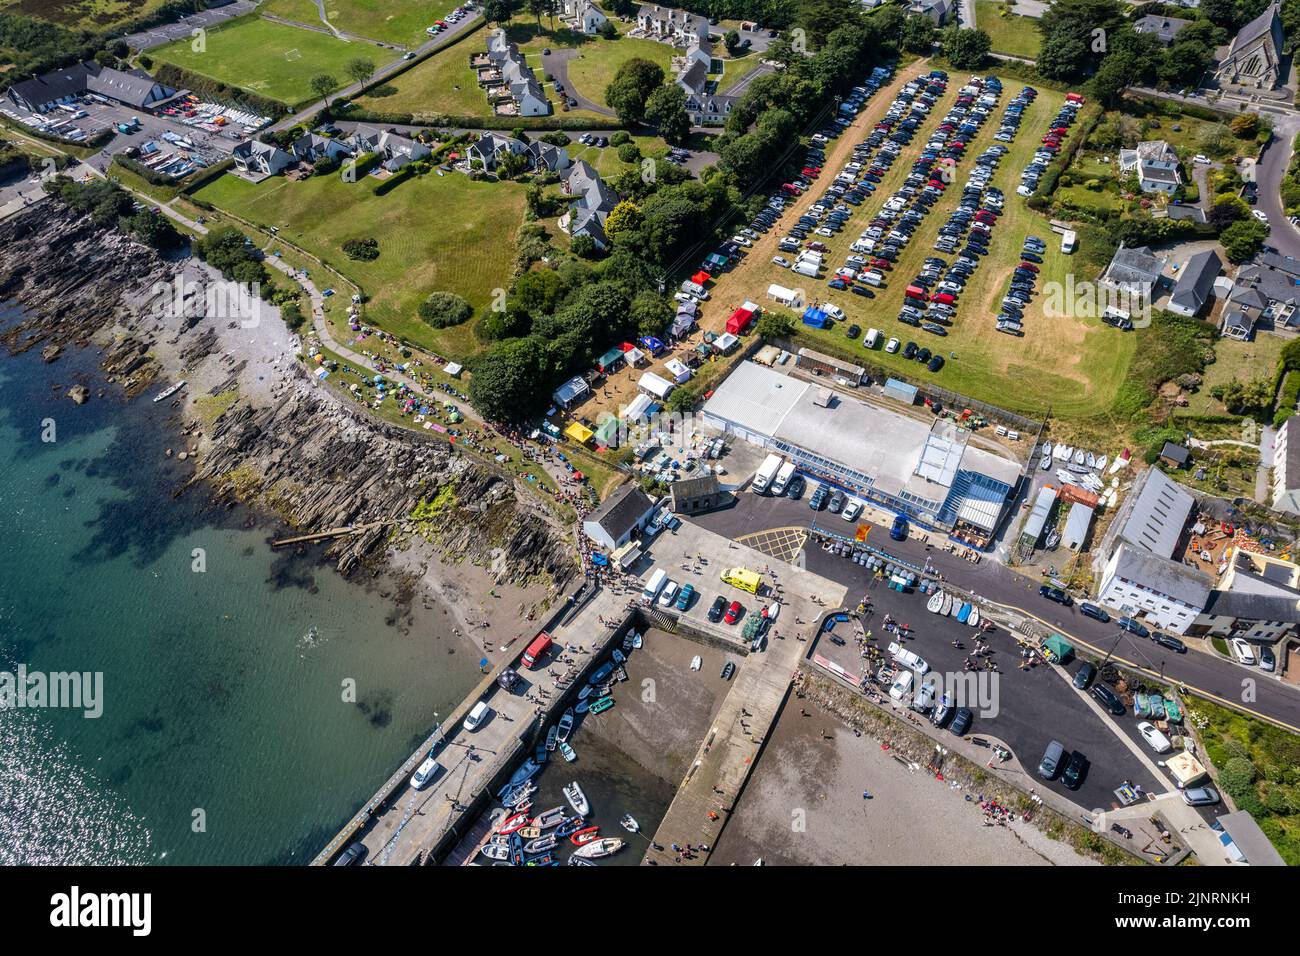 Schull, West Cork, Ireland. 13th Aug, 2022. The 2022 Irish Coastal Rowing Championships is taking place this weekend in Schull, West Cork. A total of 290 crews from different clubs are taking part in the event which finishes Sunday evening. Hundreds of spectators crowded the banks of Schull bay to watch the action. Credit: AG News/Alamy Live News Stock Photo